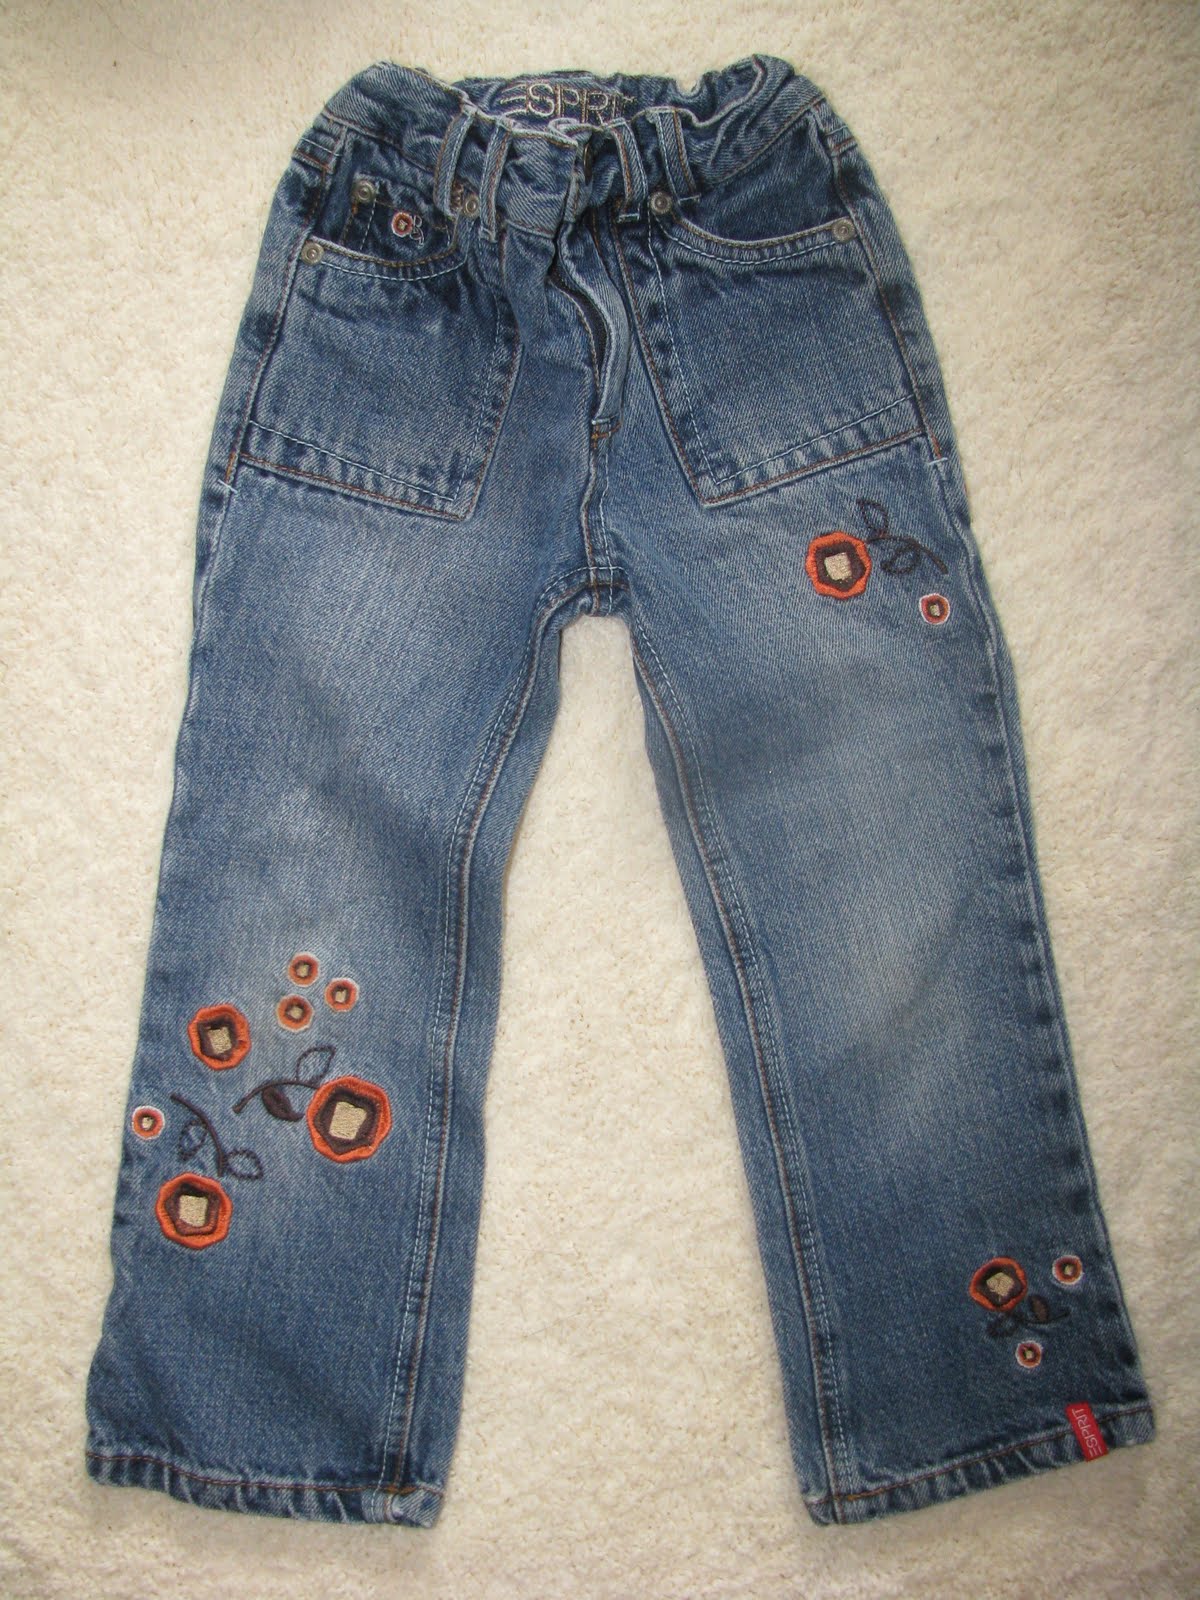 3t and 4t clothing lot on ebay: denim jeans with flower embroidery